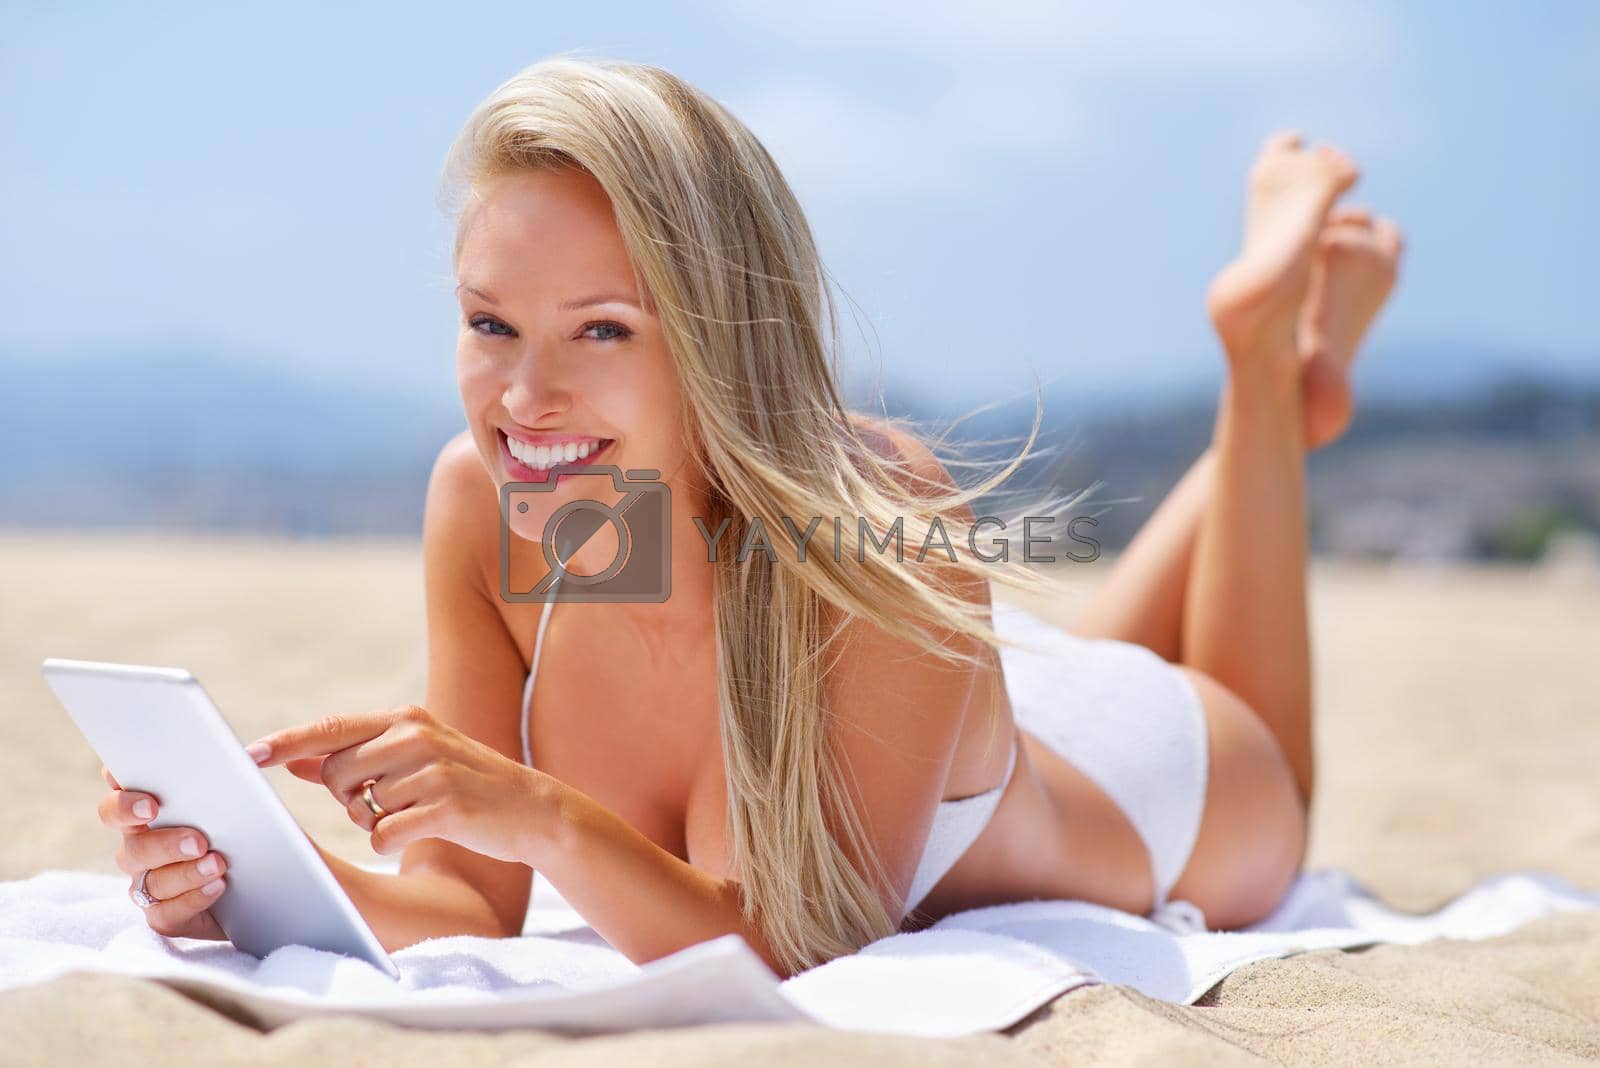 Royalty free image of Status update...catching a tan and feeling great. A tanned woman relaxing on the beach while using her tablet. by YuriArcurs